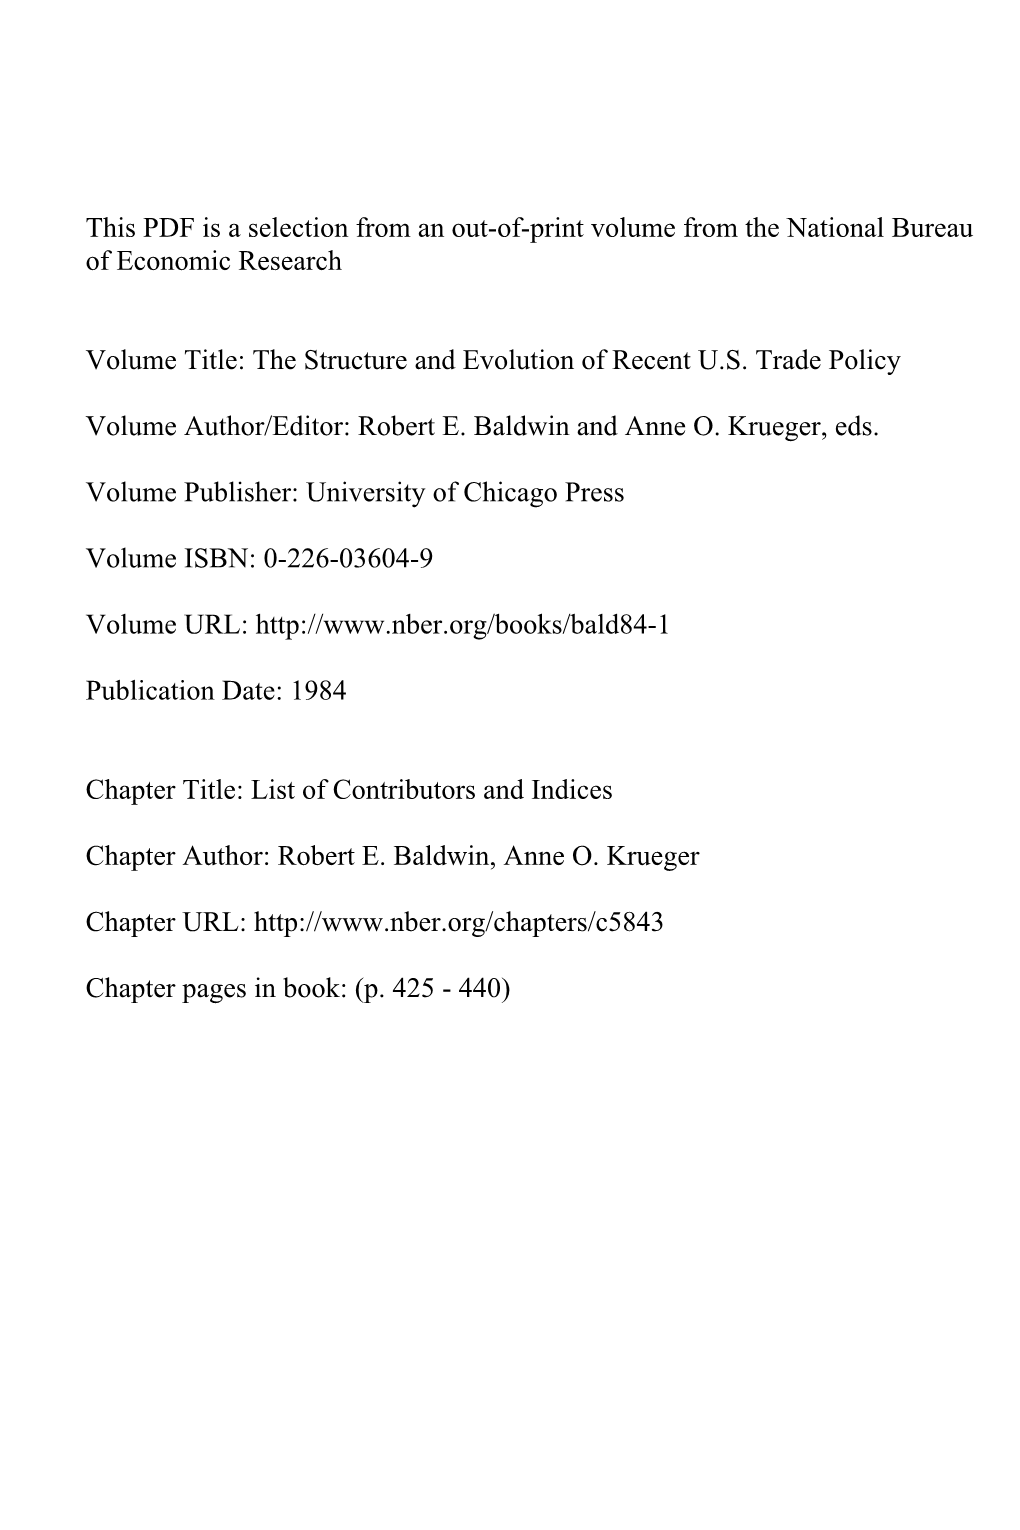 List of Contributors and Indices